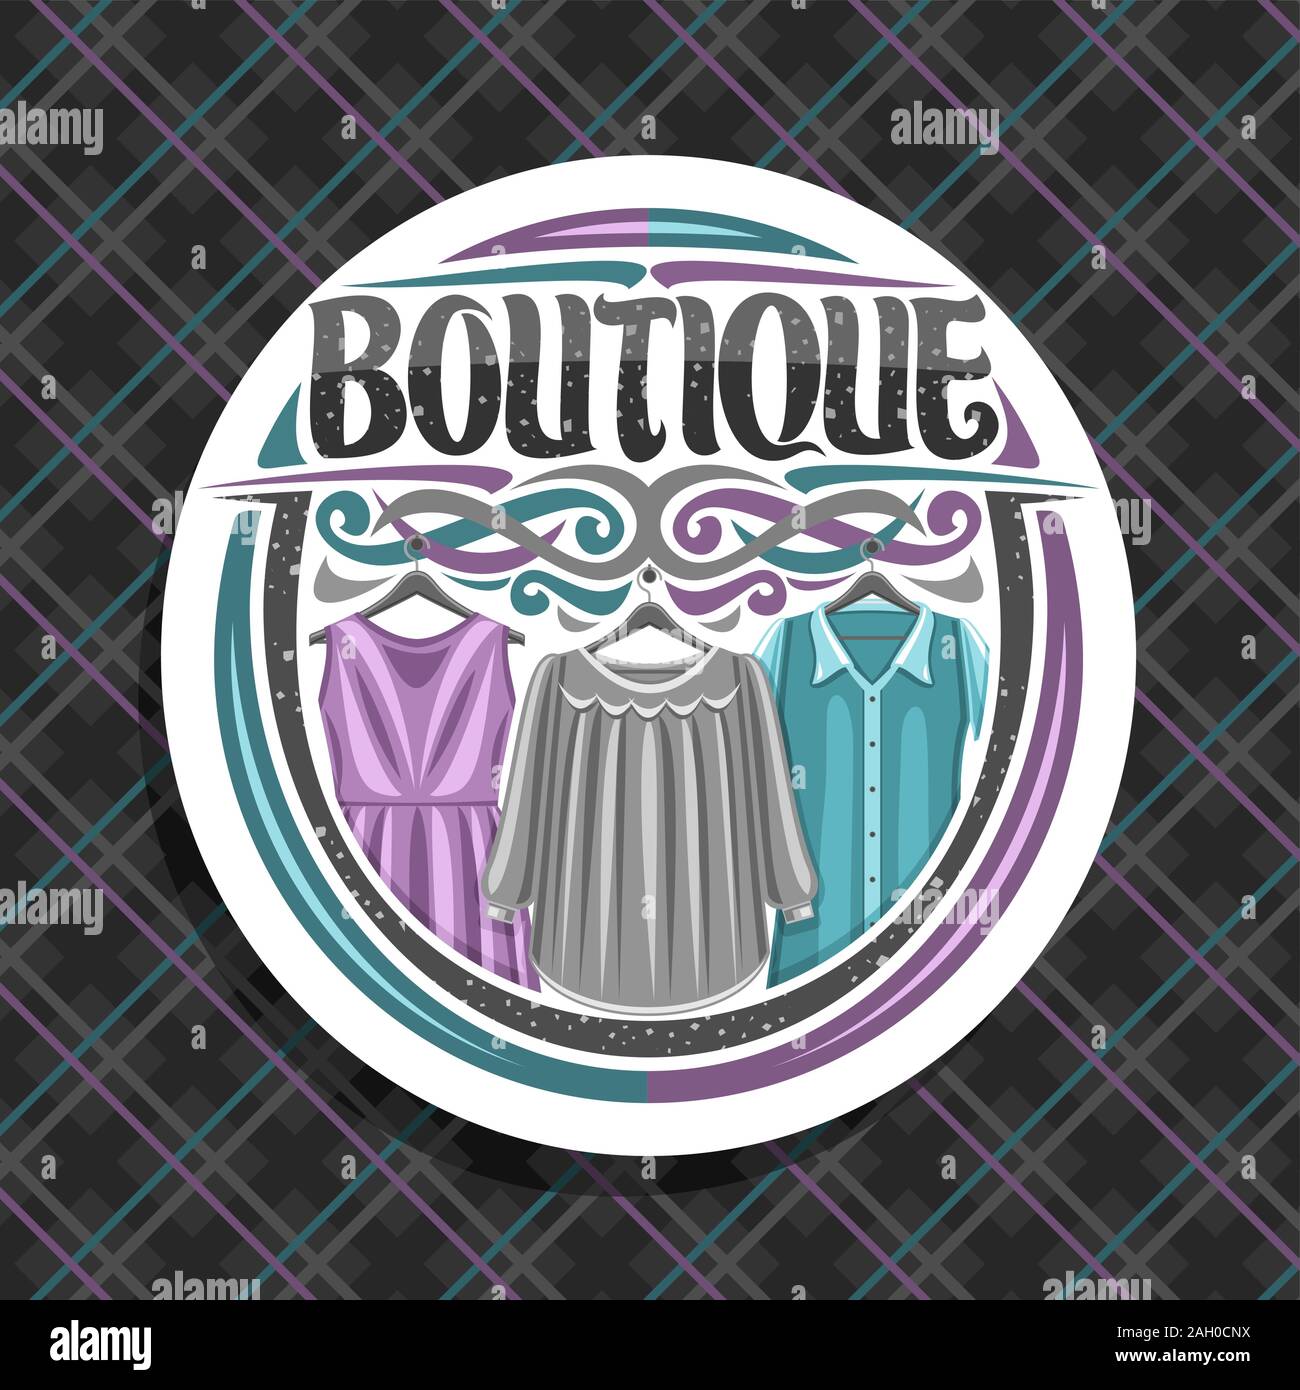 Vector logo for Boutique, white label with illustration of 3 colorful women's dresses, original brush lettering for word boutique and design elements, Stock Vector